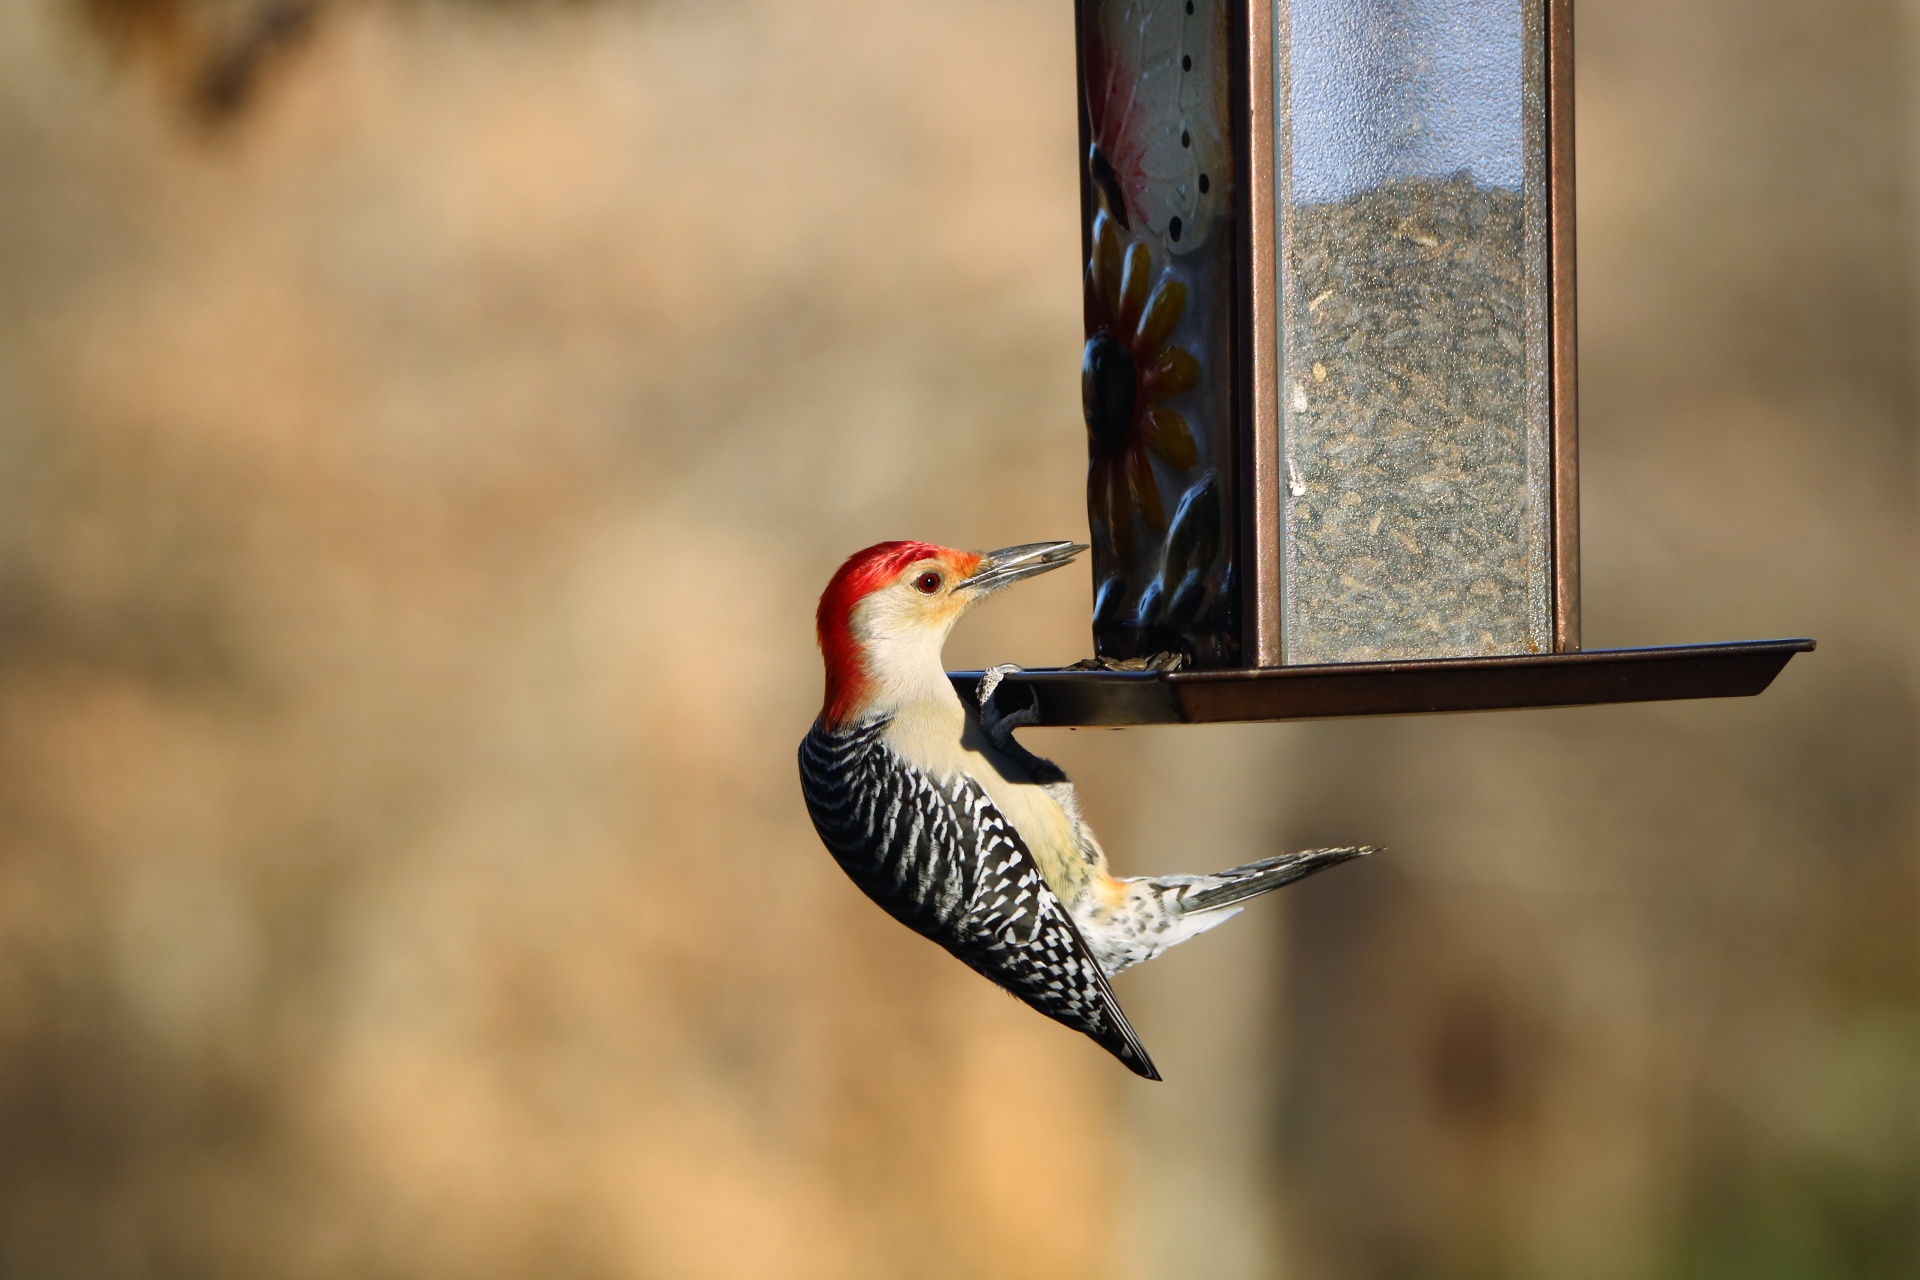 Close-up of a male red-bellied woodpecker as he hangs off the side of a bird feeder with a sunflower seed in his beak.